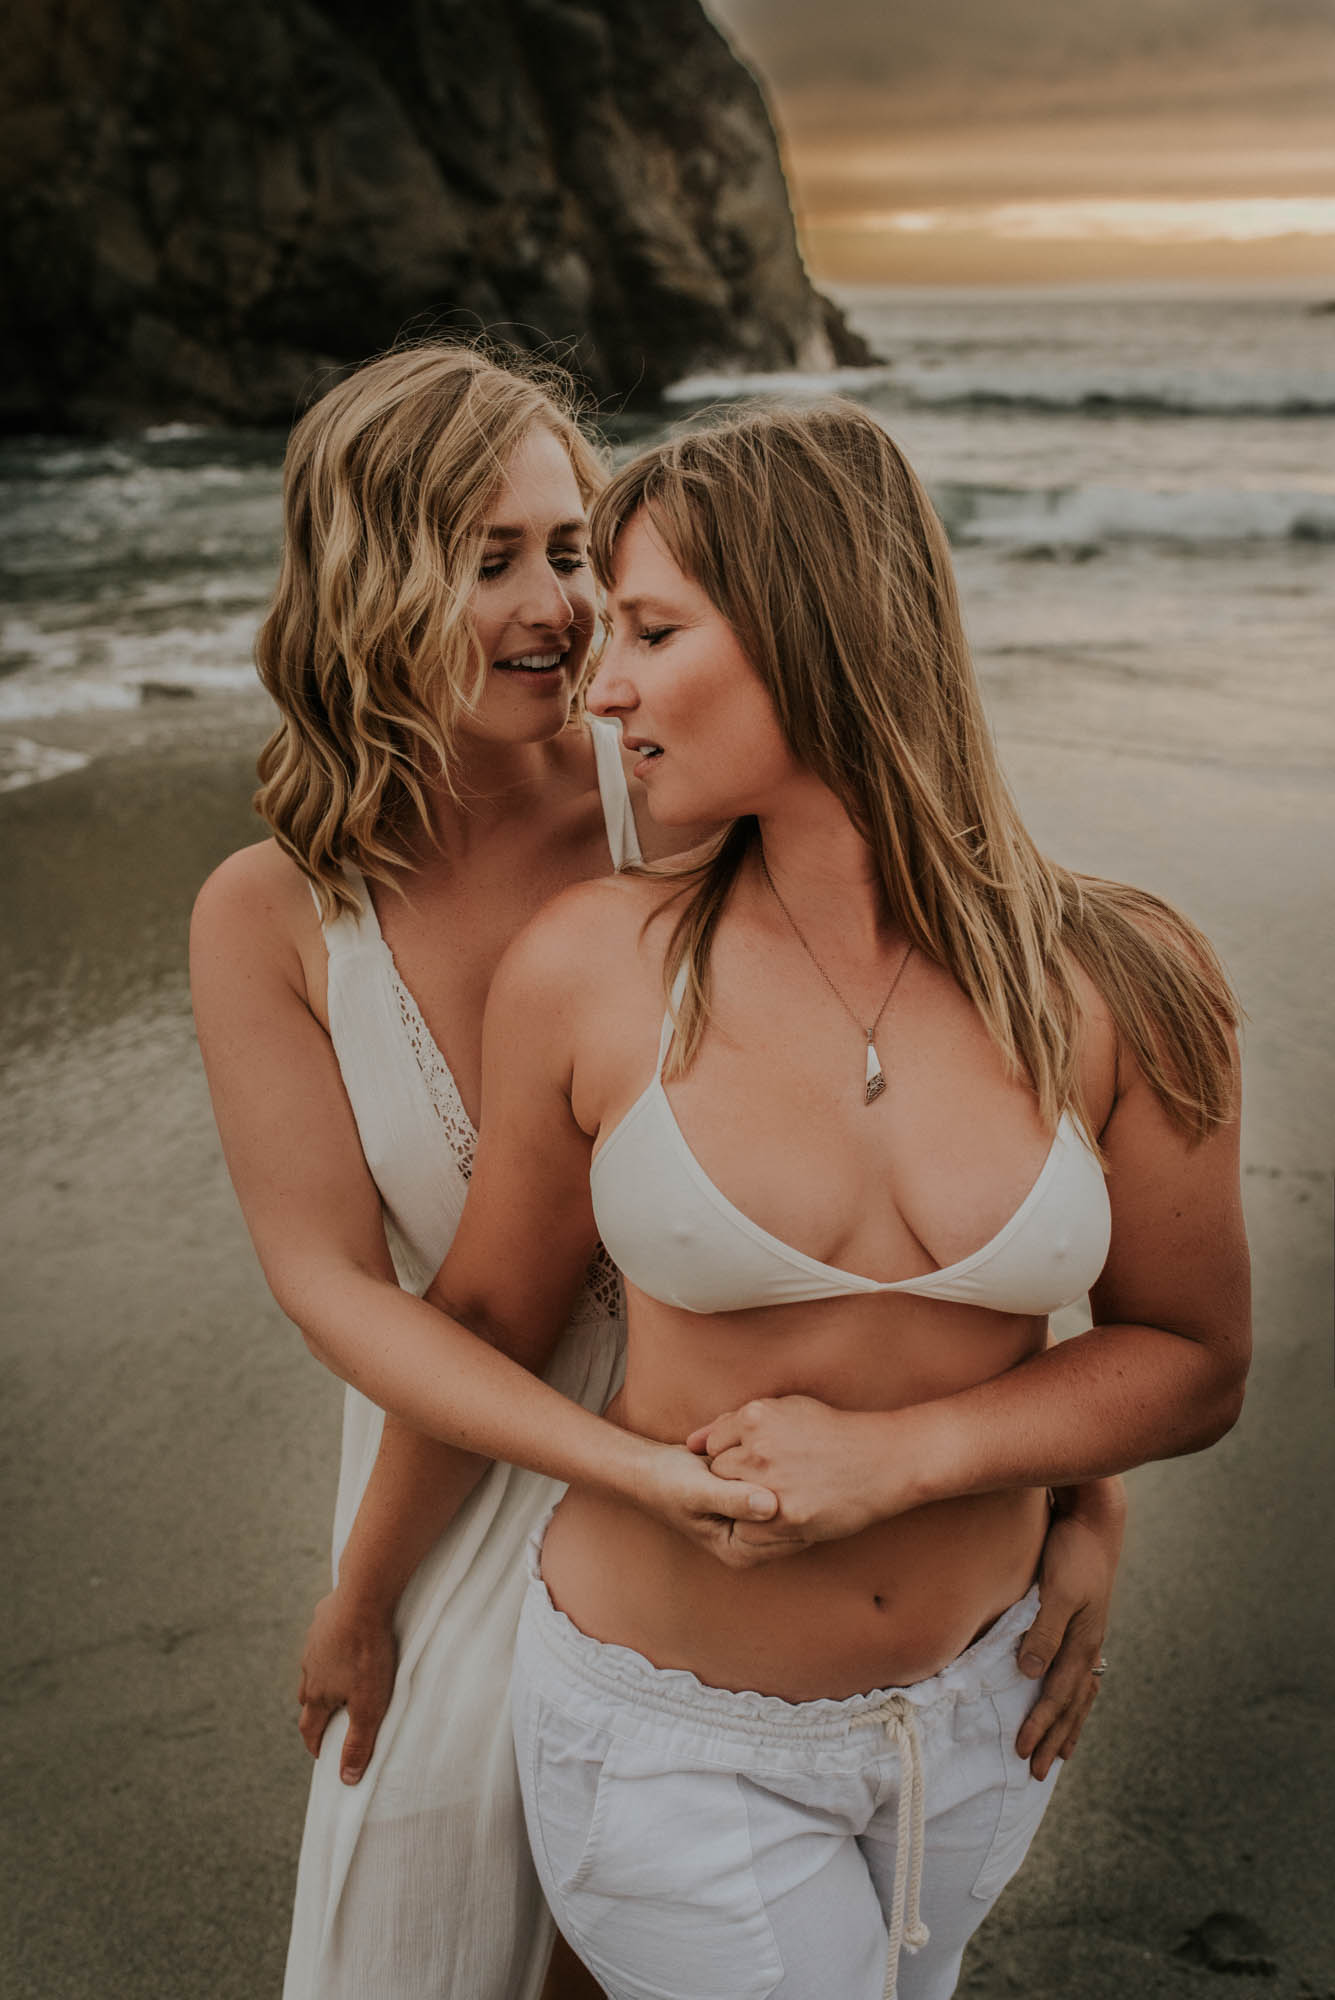 Magical engagement photo session in Big Sur. Photography by Heather K. Purdy. Featured on Equally Wed, the leading LGBTQ+ wedding magazine and wedding vendor directory of LGBTQ+ inclusive wedding pros. romantic sexy image includes two blonde women in love in white outfits on beach